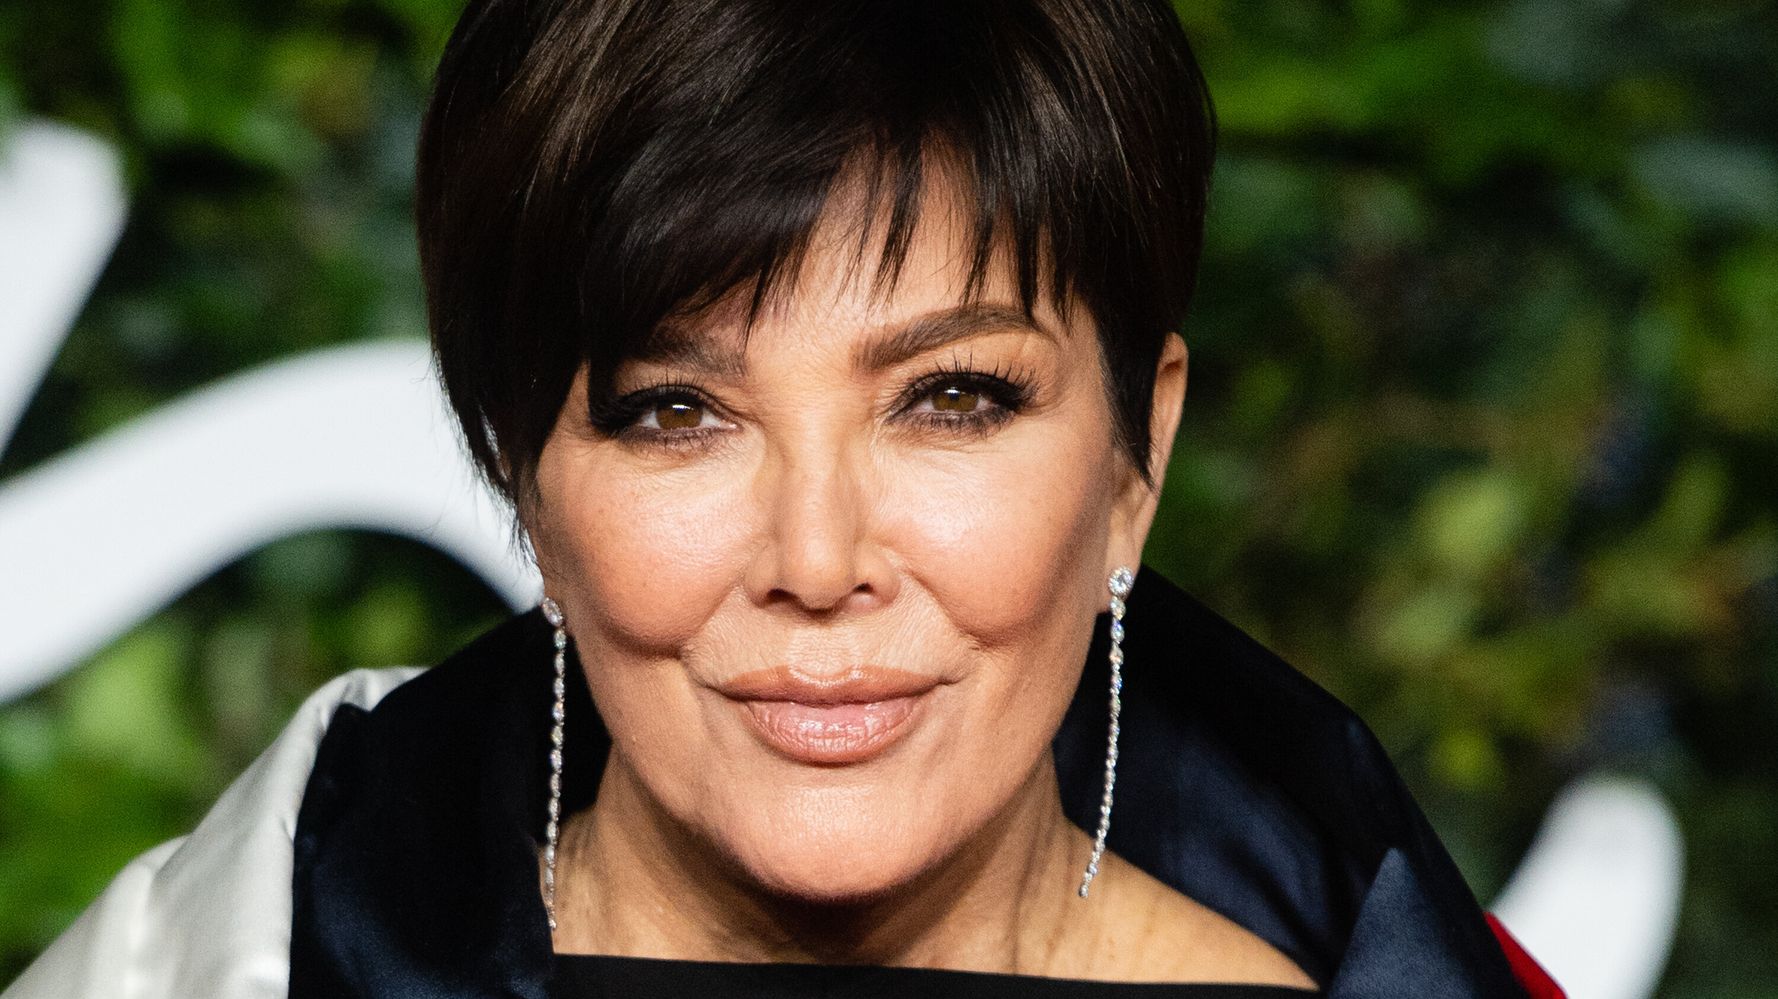 TikTok Is Turning Kris Jenner Into The New Rick Astley Thanks To Viral Trend